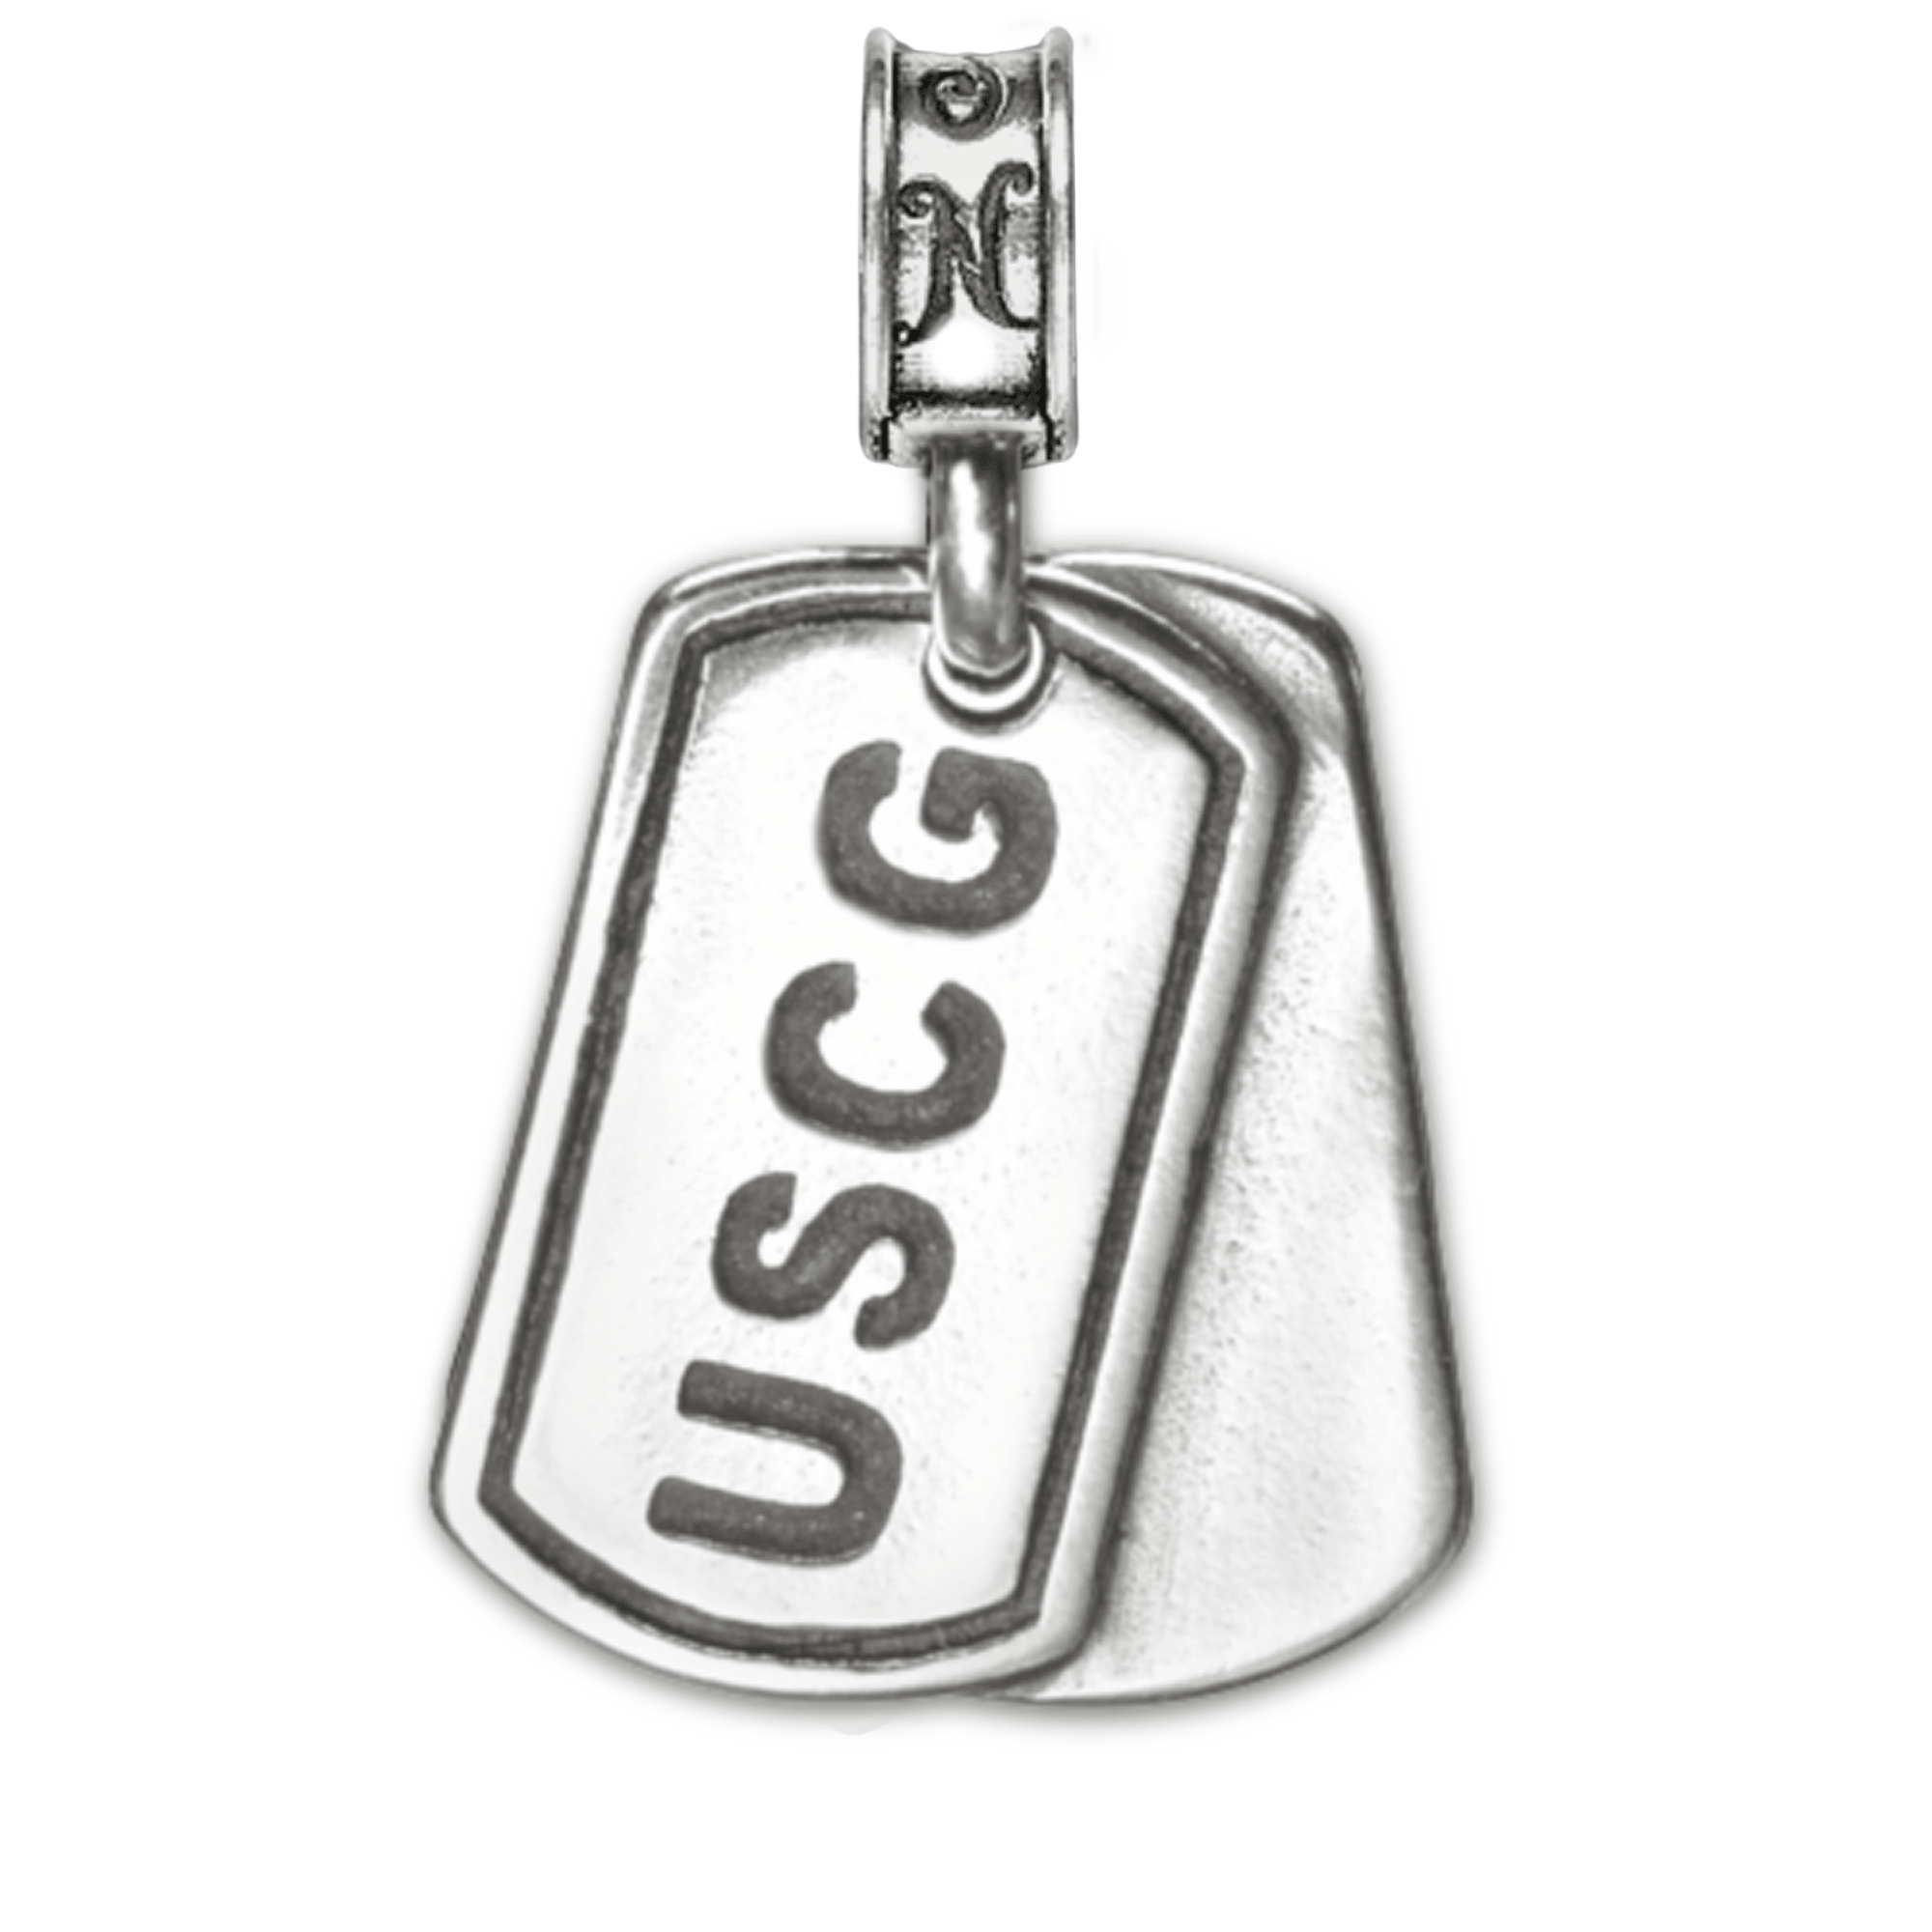 Military Jewelry, Military Charms, Military Gifts, United States Coast Guard, USCG